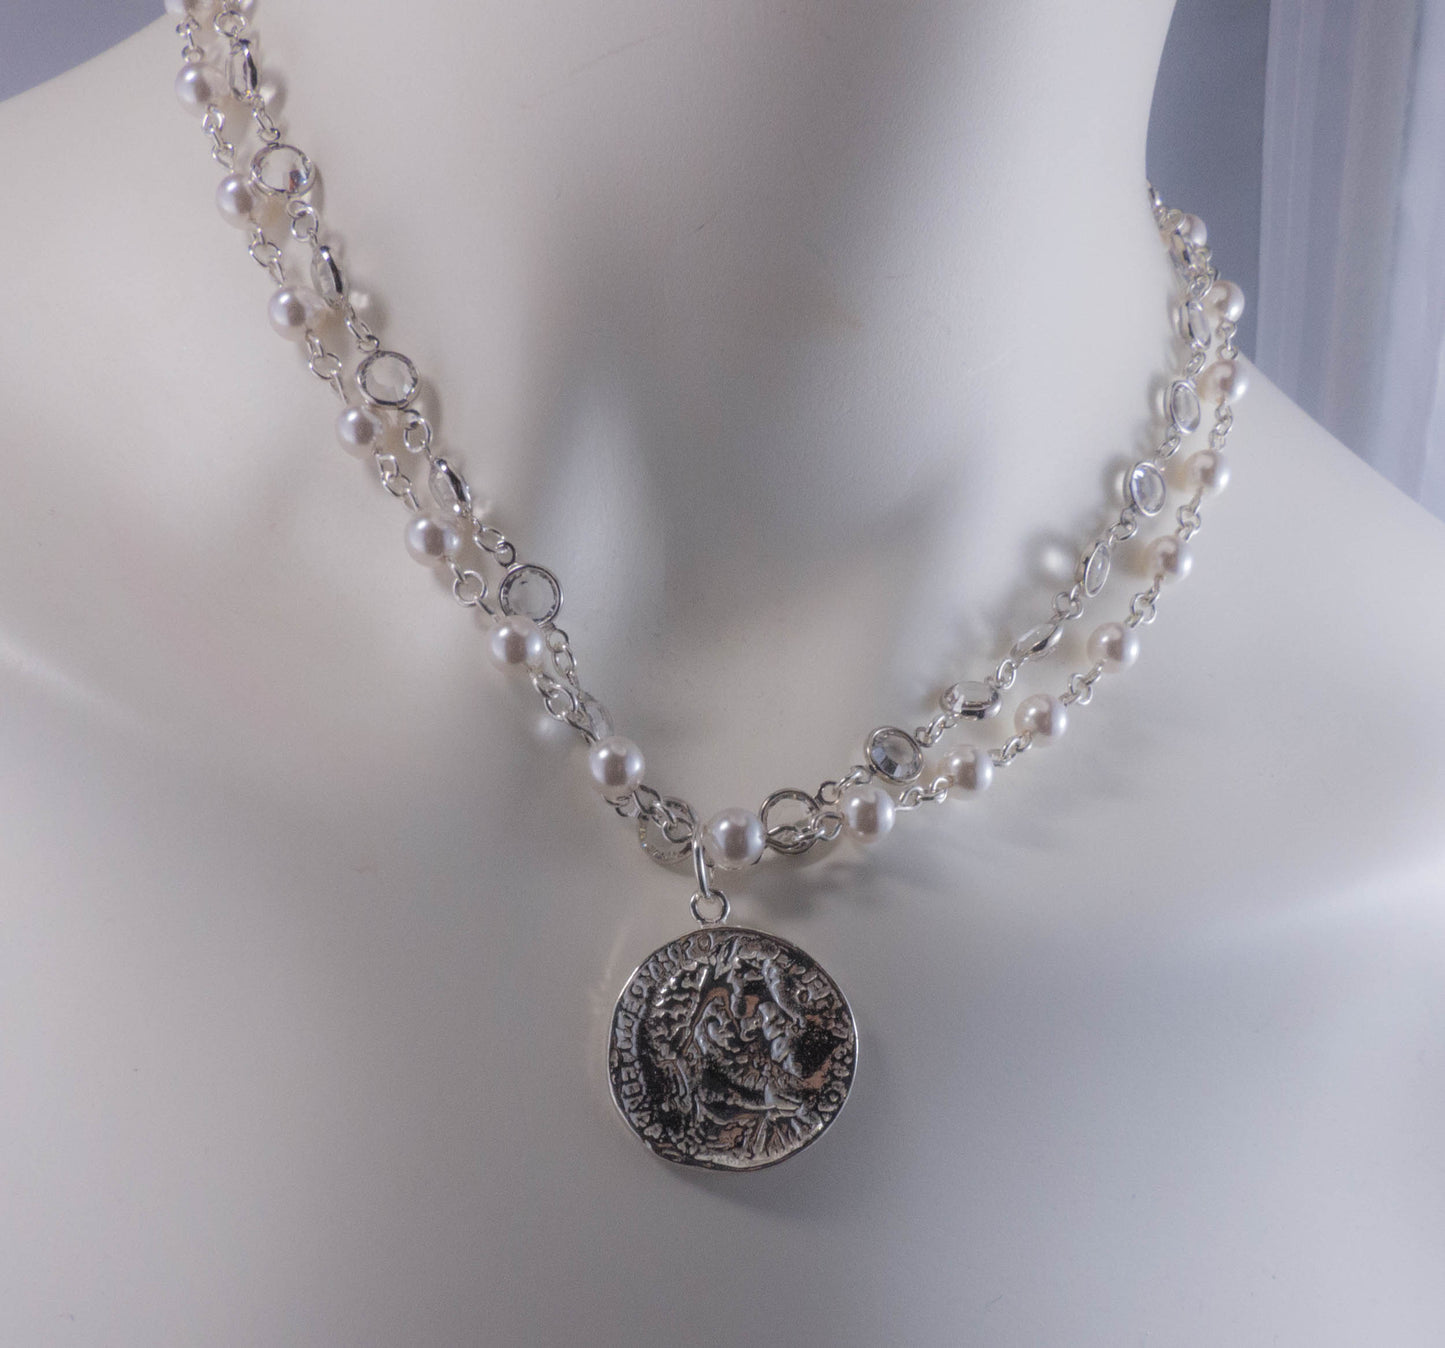 Swarovski Pearls and Crystals - A Wearable Masterpiece Fit for Royalty